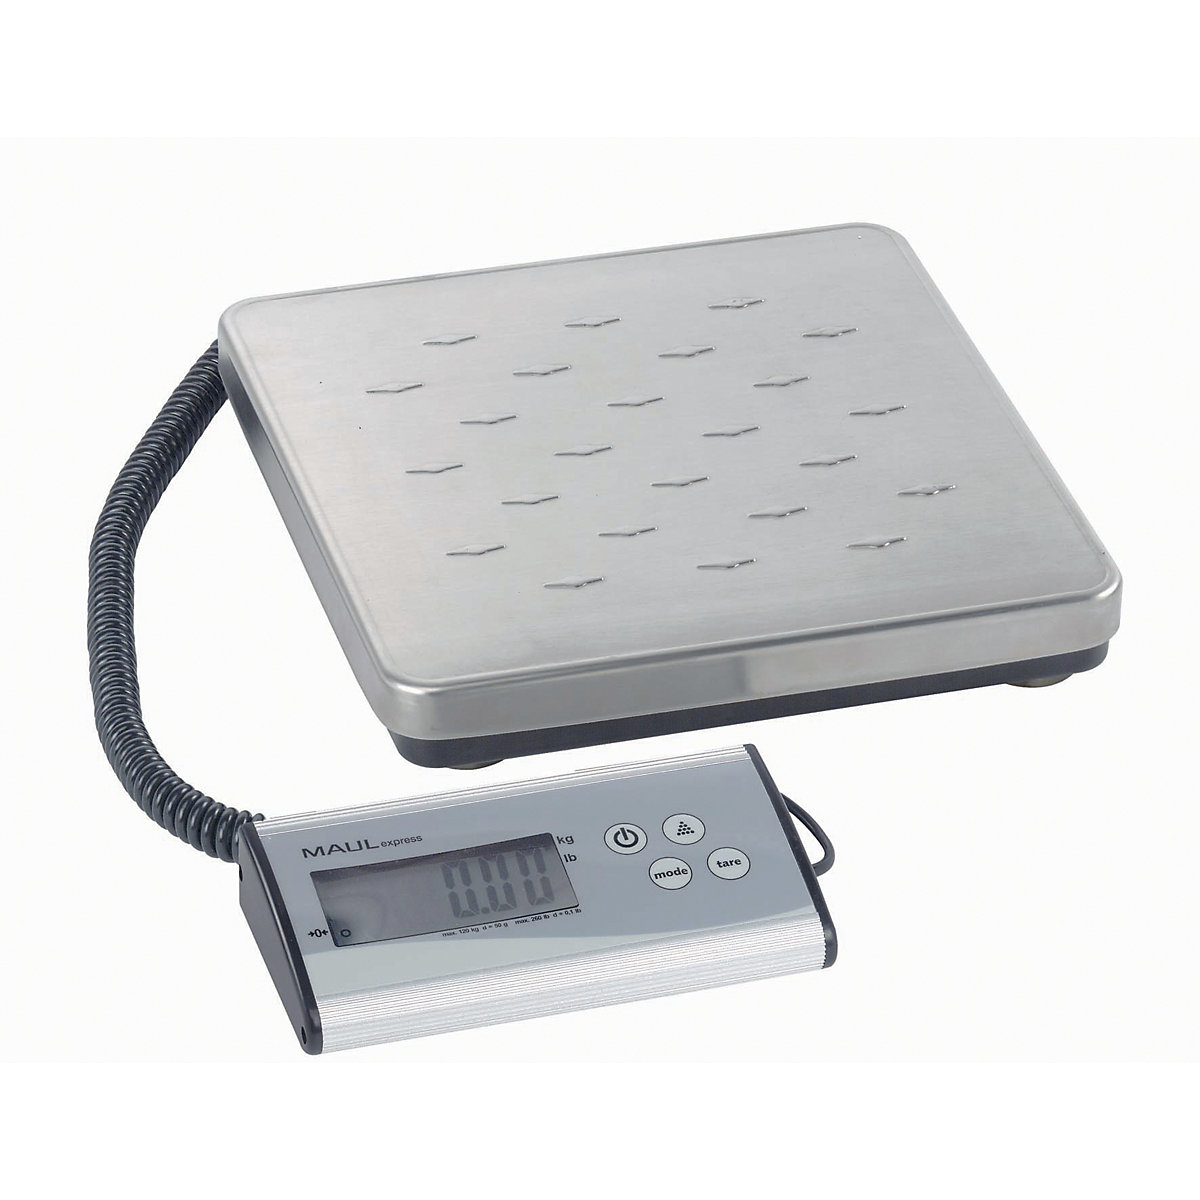 MAULcargo parcel scales – MAUL, separate control unit, weighing range up to 120 kg, read-out accuracy 50 g, weighing plate 270 x 270 mm-4